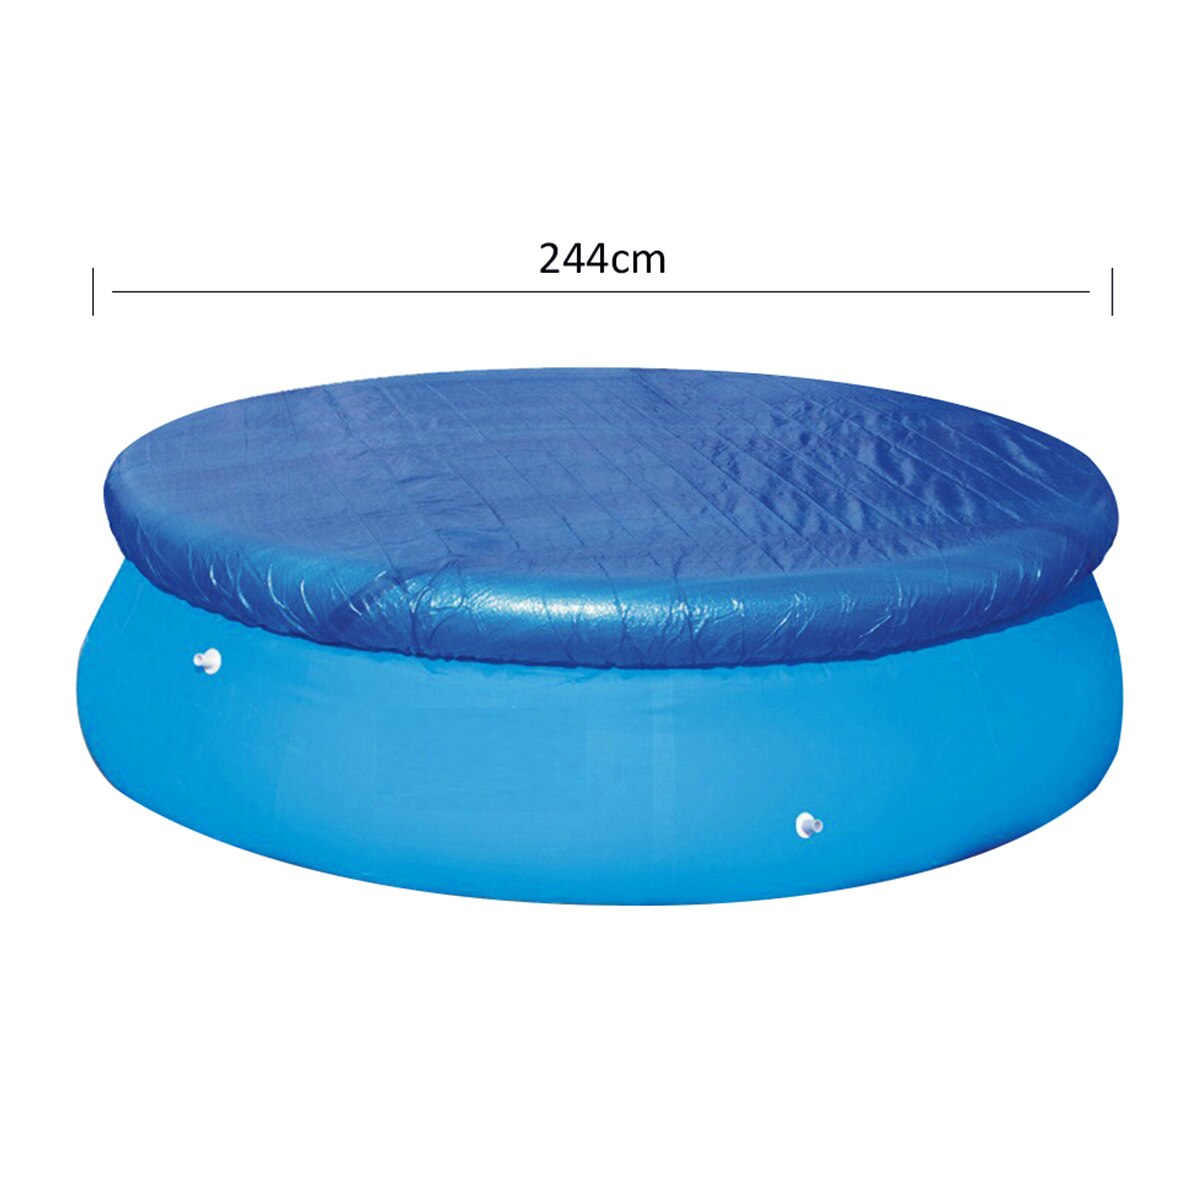 Swimming Pool Cover Solar Pool Covers Awning Cape on Pool Easy Set for Frame Pools Inflatable Swimming Fast Set Pool: Diameter 244cm